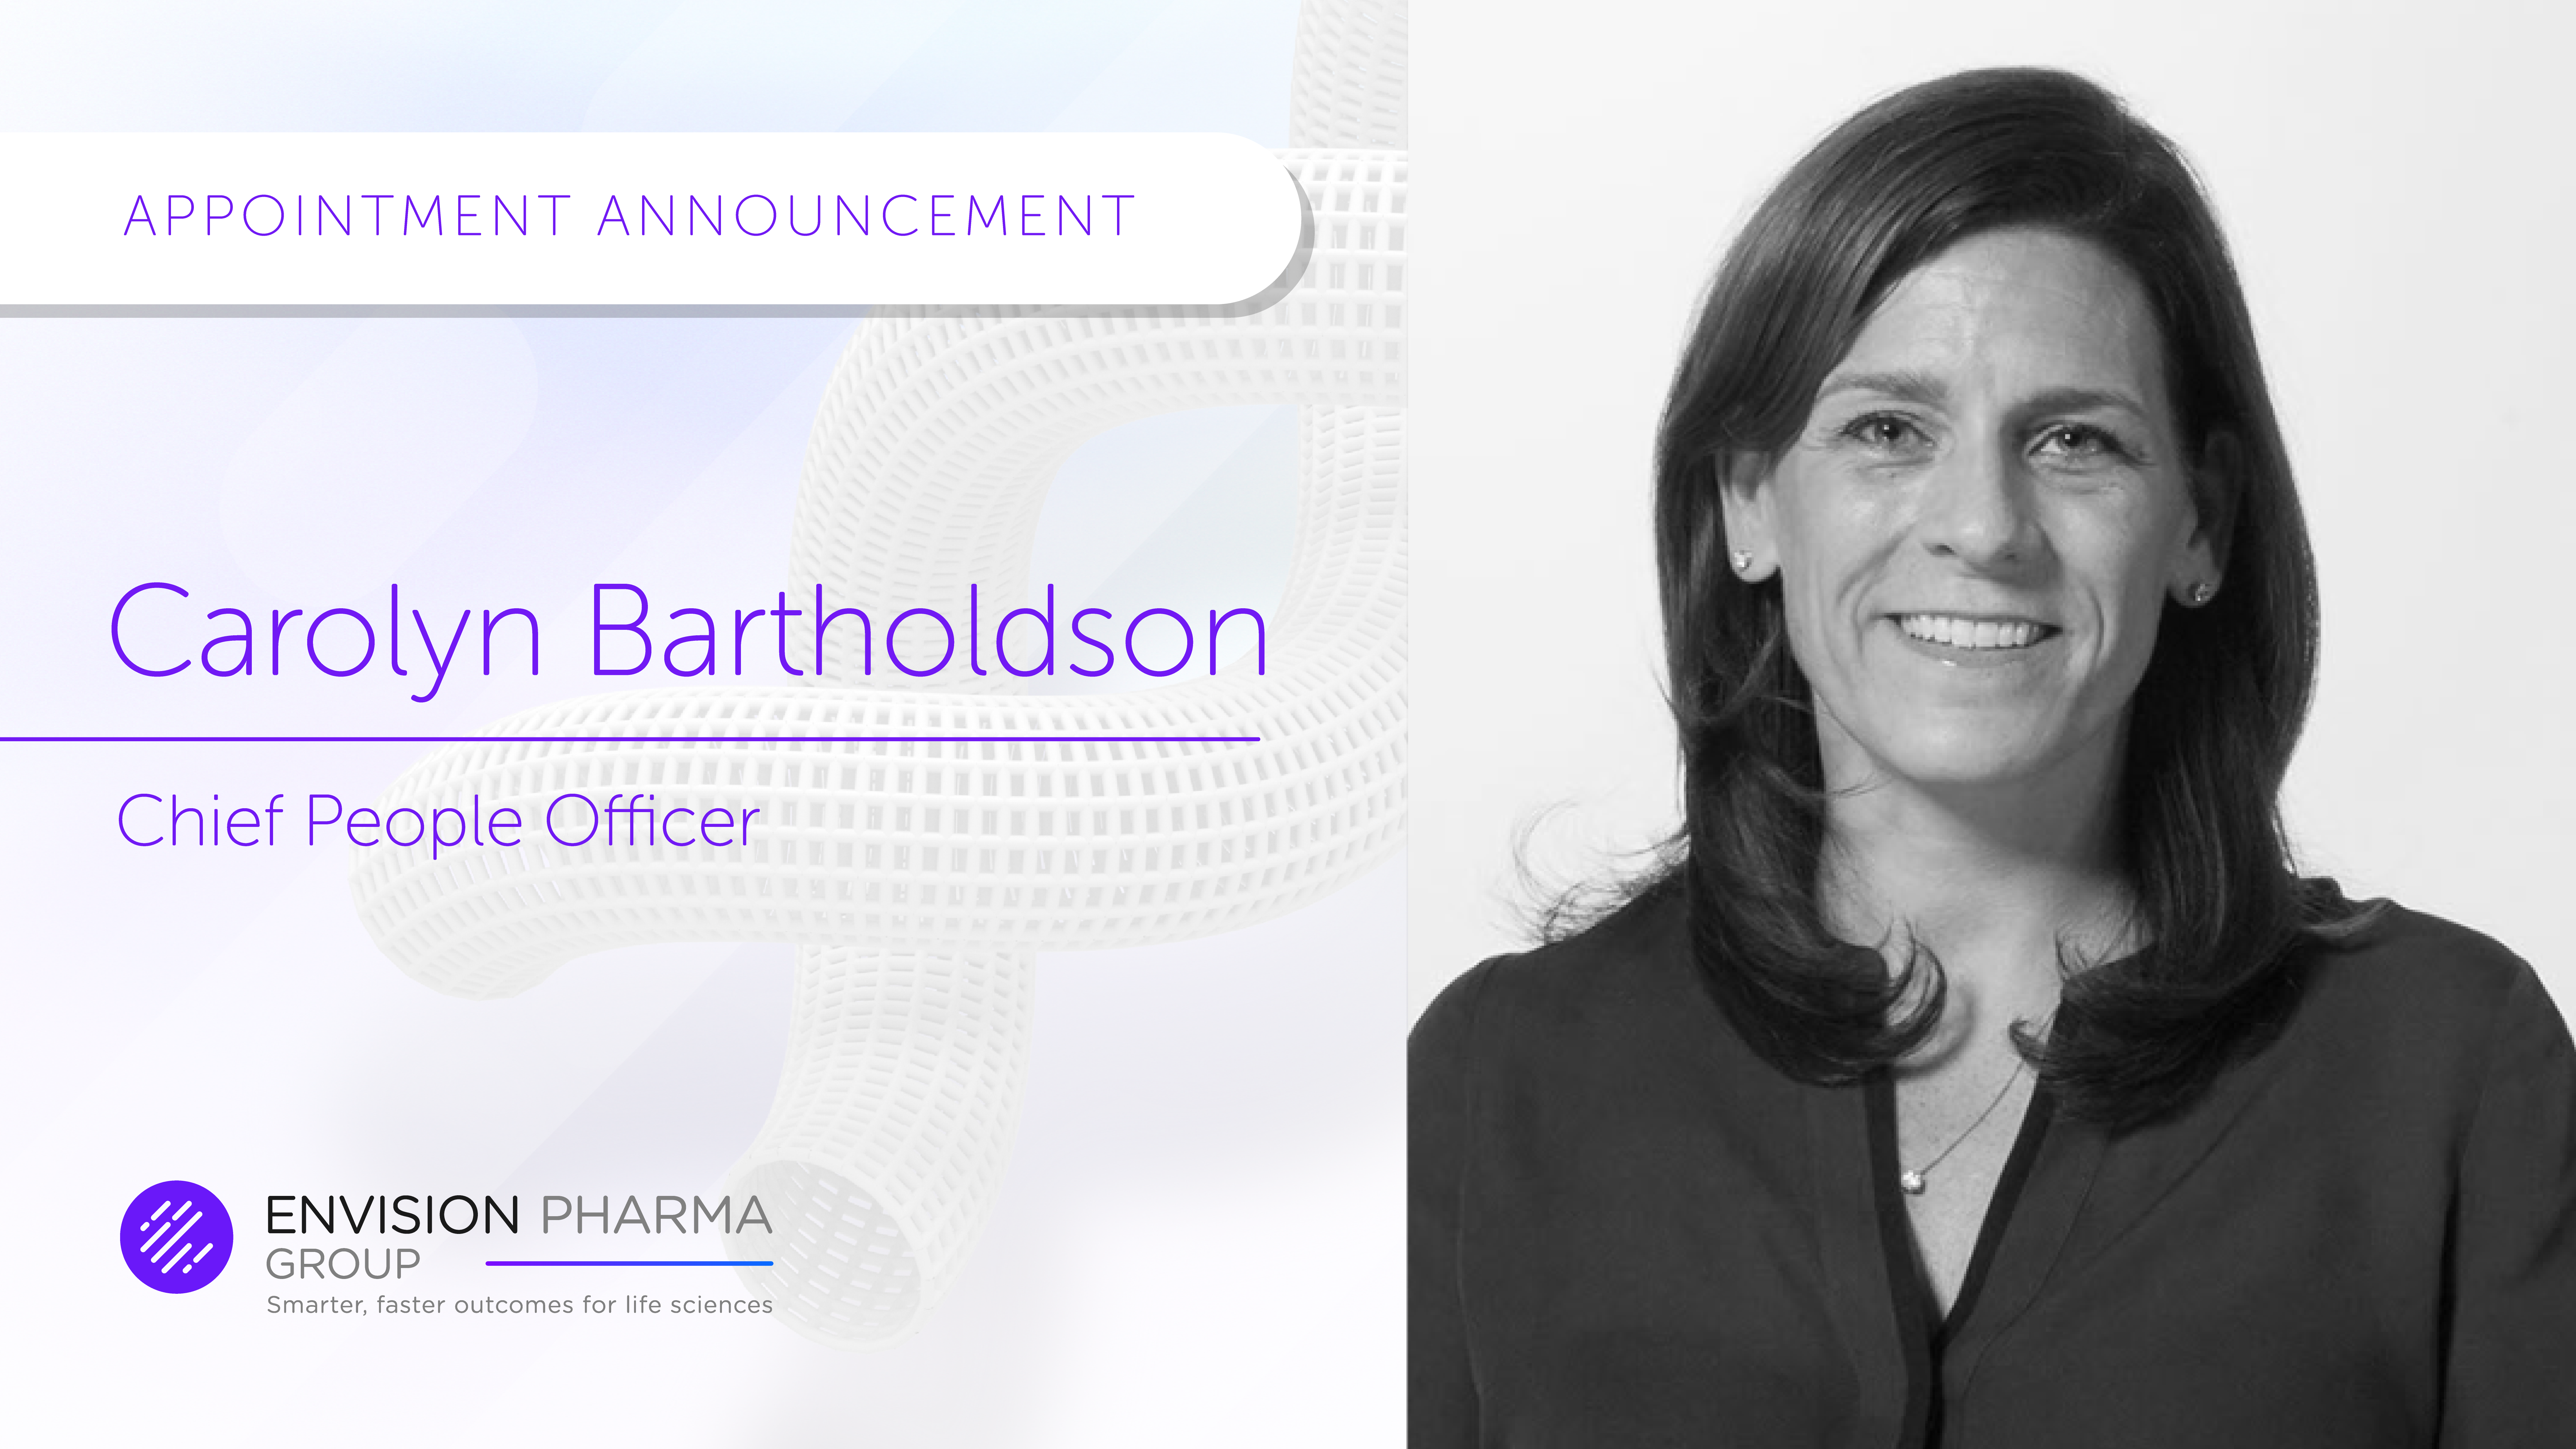 Appointment announcement_Carolyn_Barthodson_website_gf01_2